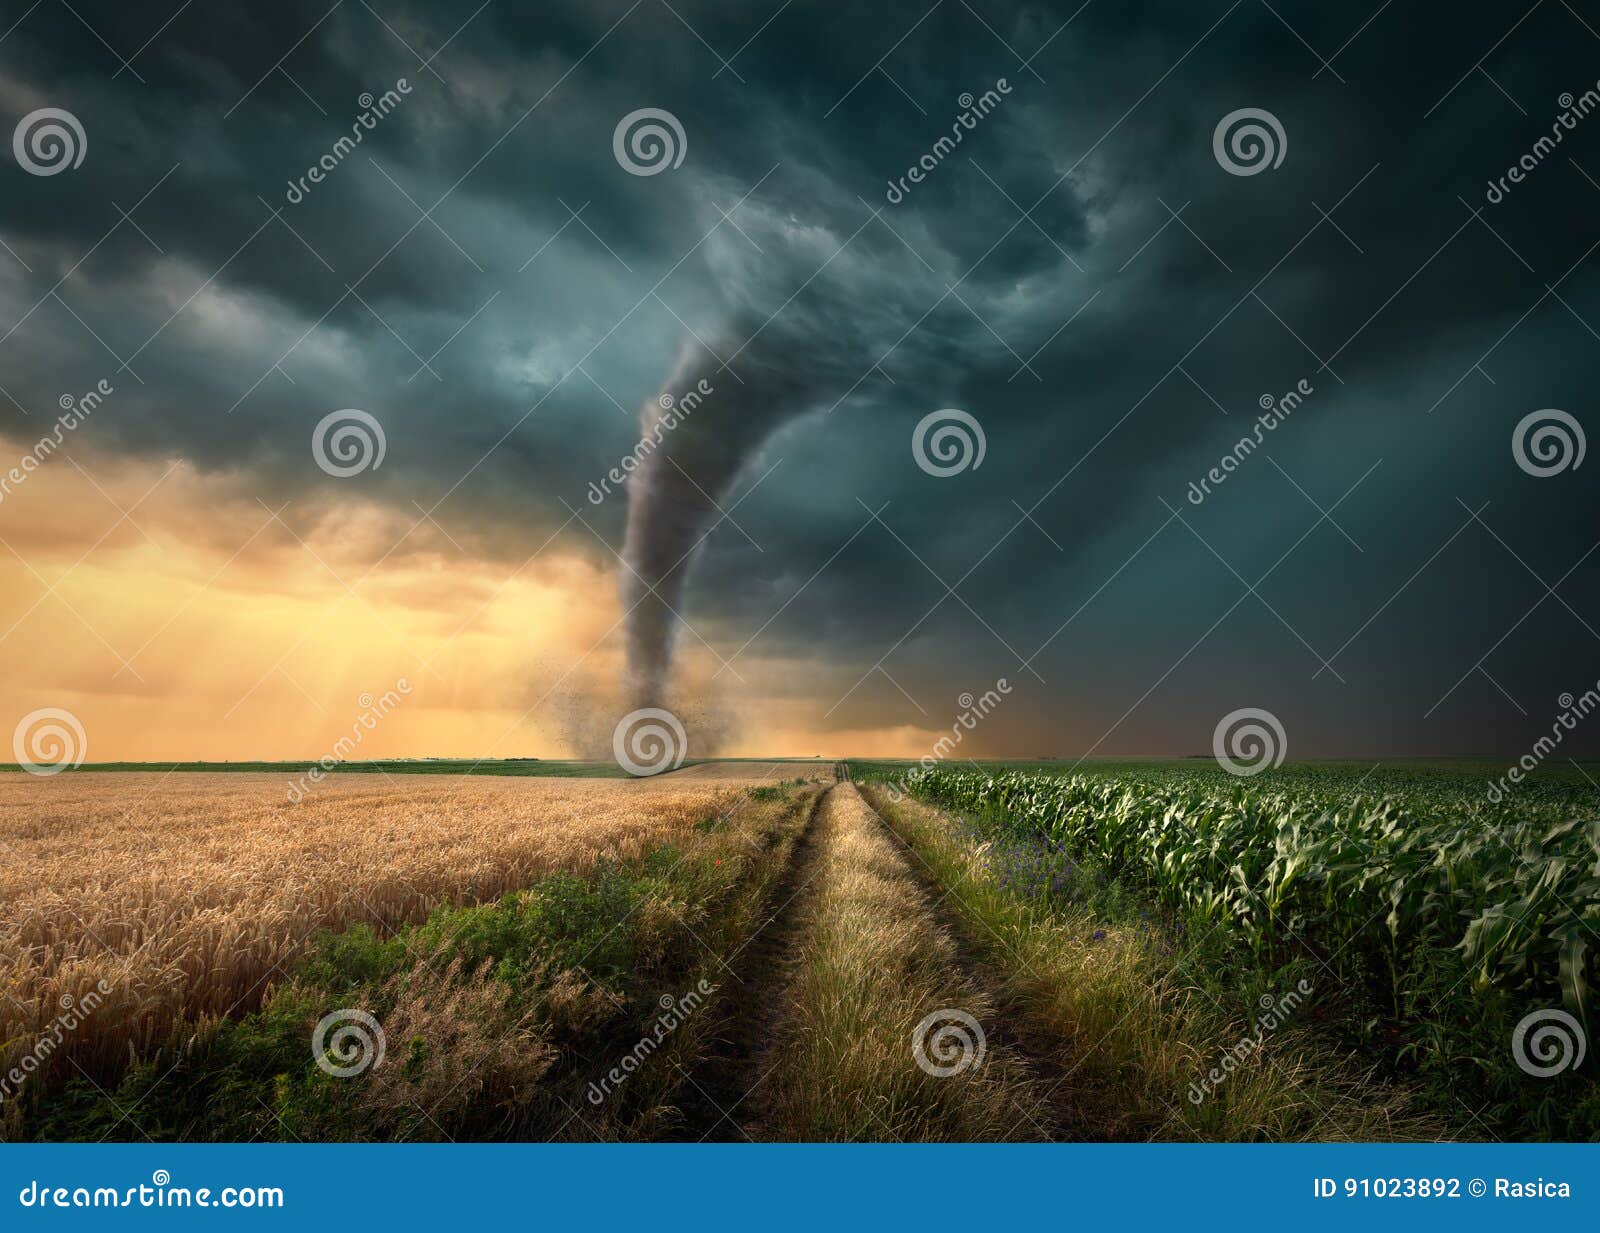 tornado struck on agricultural fields at sunset